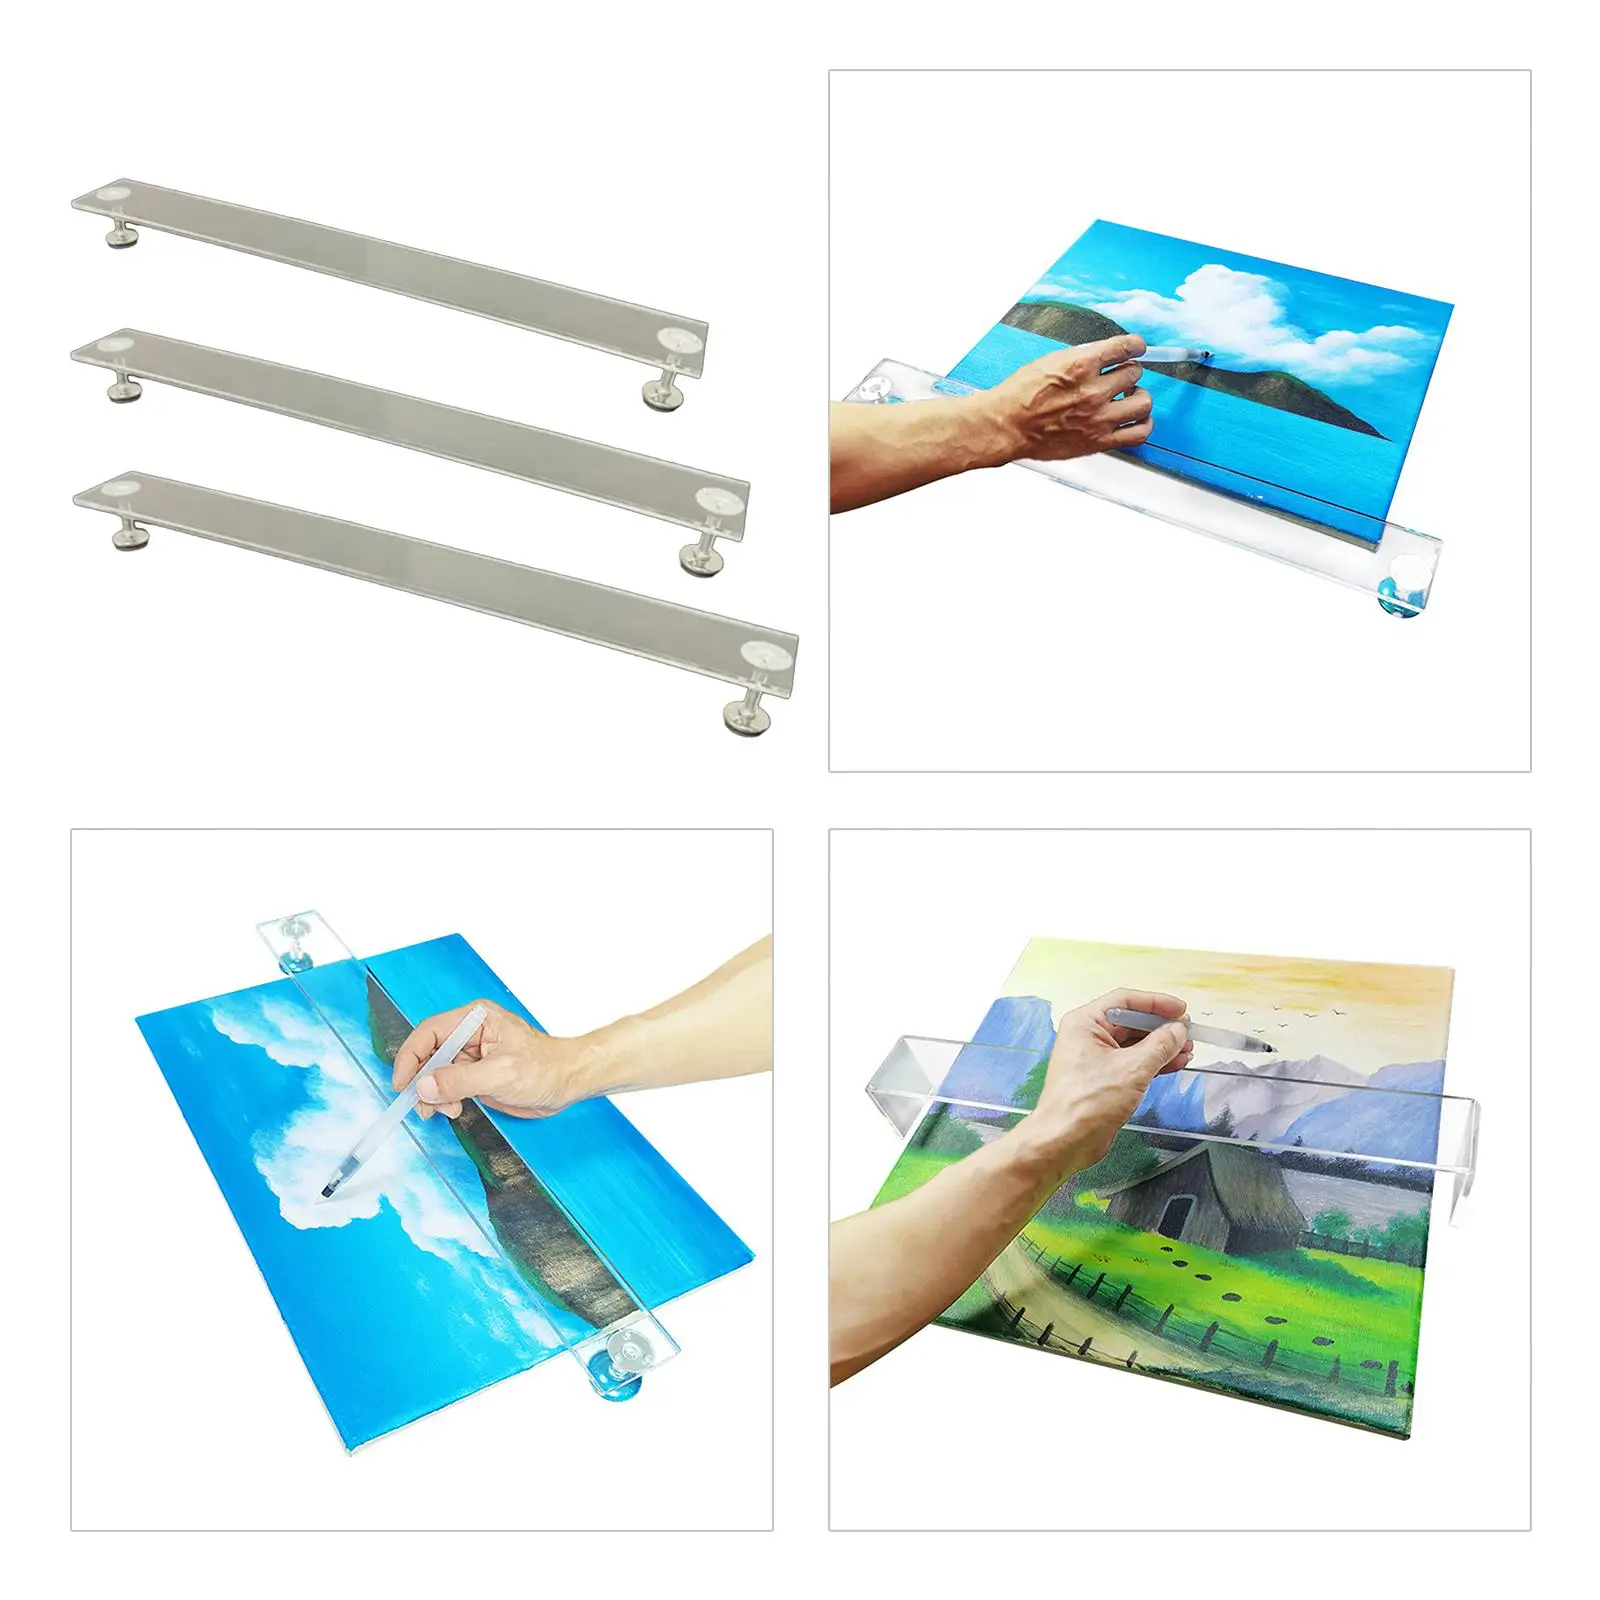 Artist Leaning Bridge Acrylic Sketching Transparent Shelf Palm Rest Wrist Protection Drawing Clear Panel Hand Rest Painters Tool